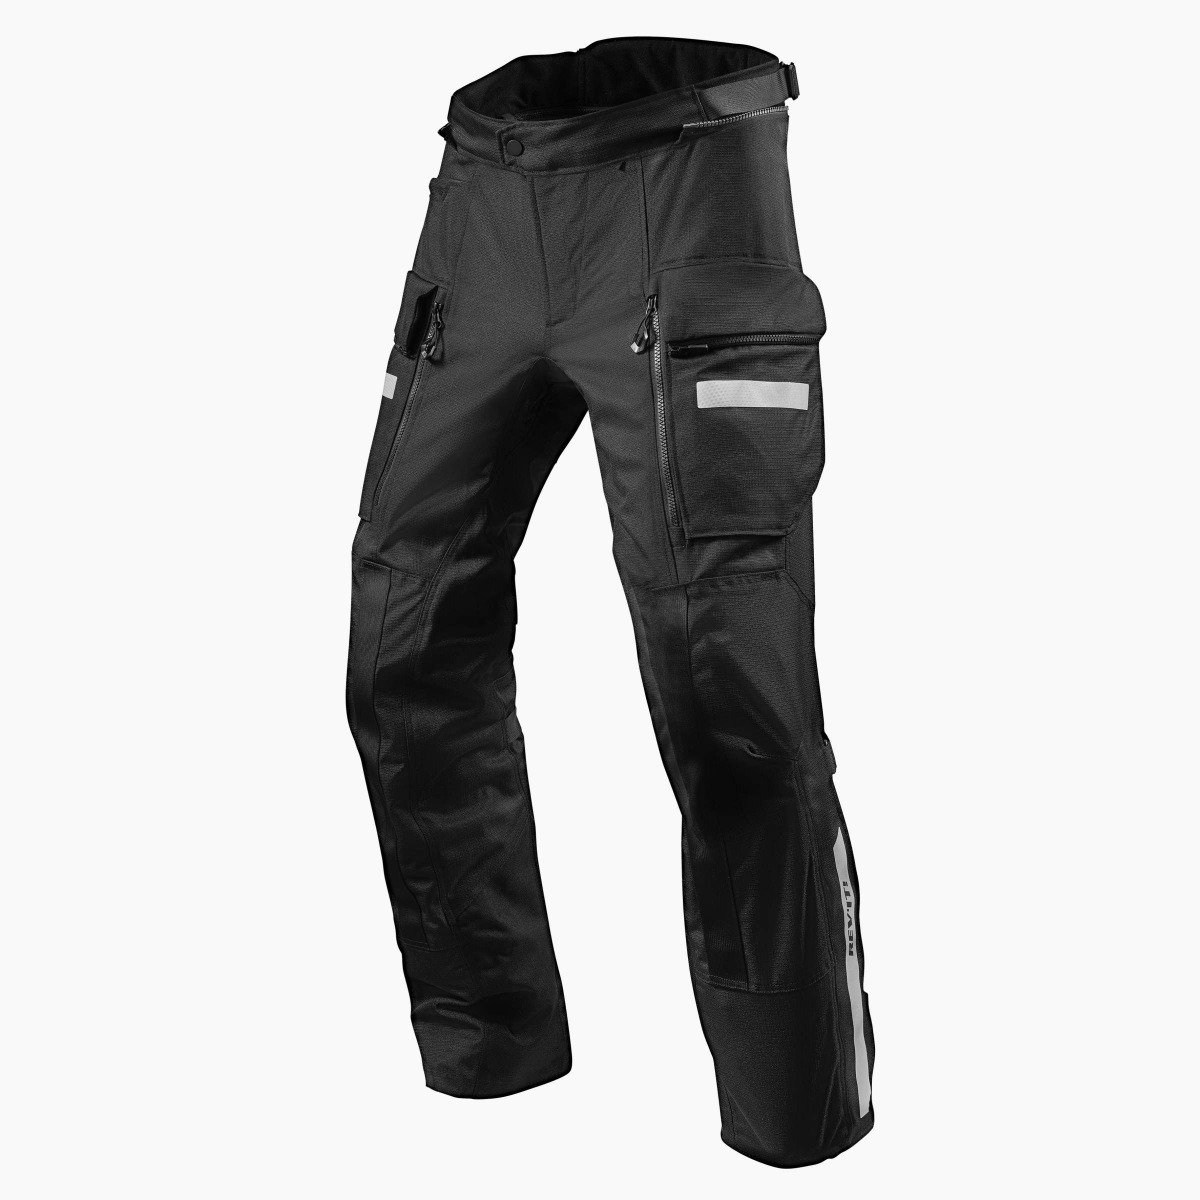 Image of REV'IT! Sand 4 H2O Standard Black Motorcycle Pants Size 3XL ID 8700001316293